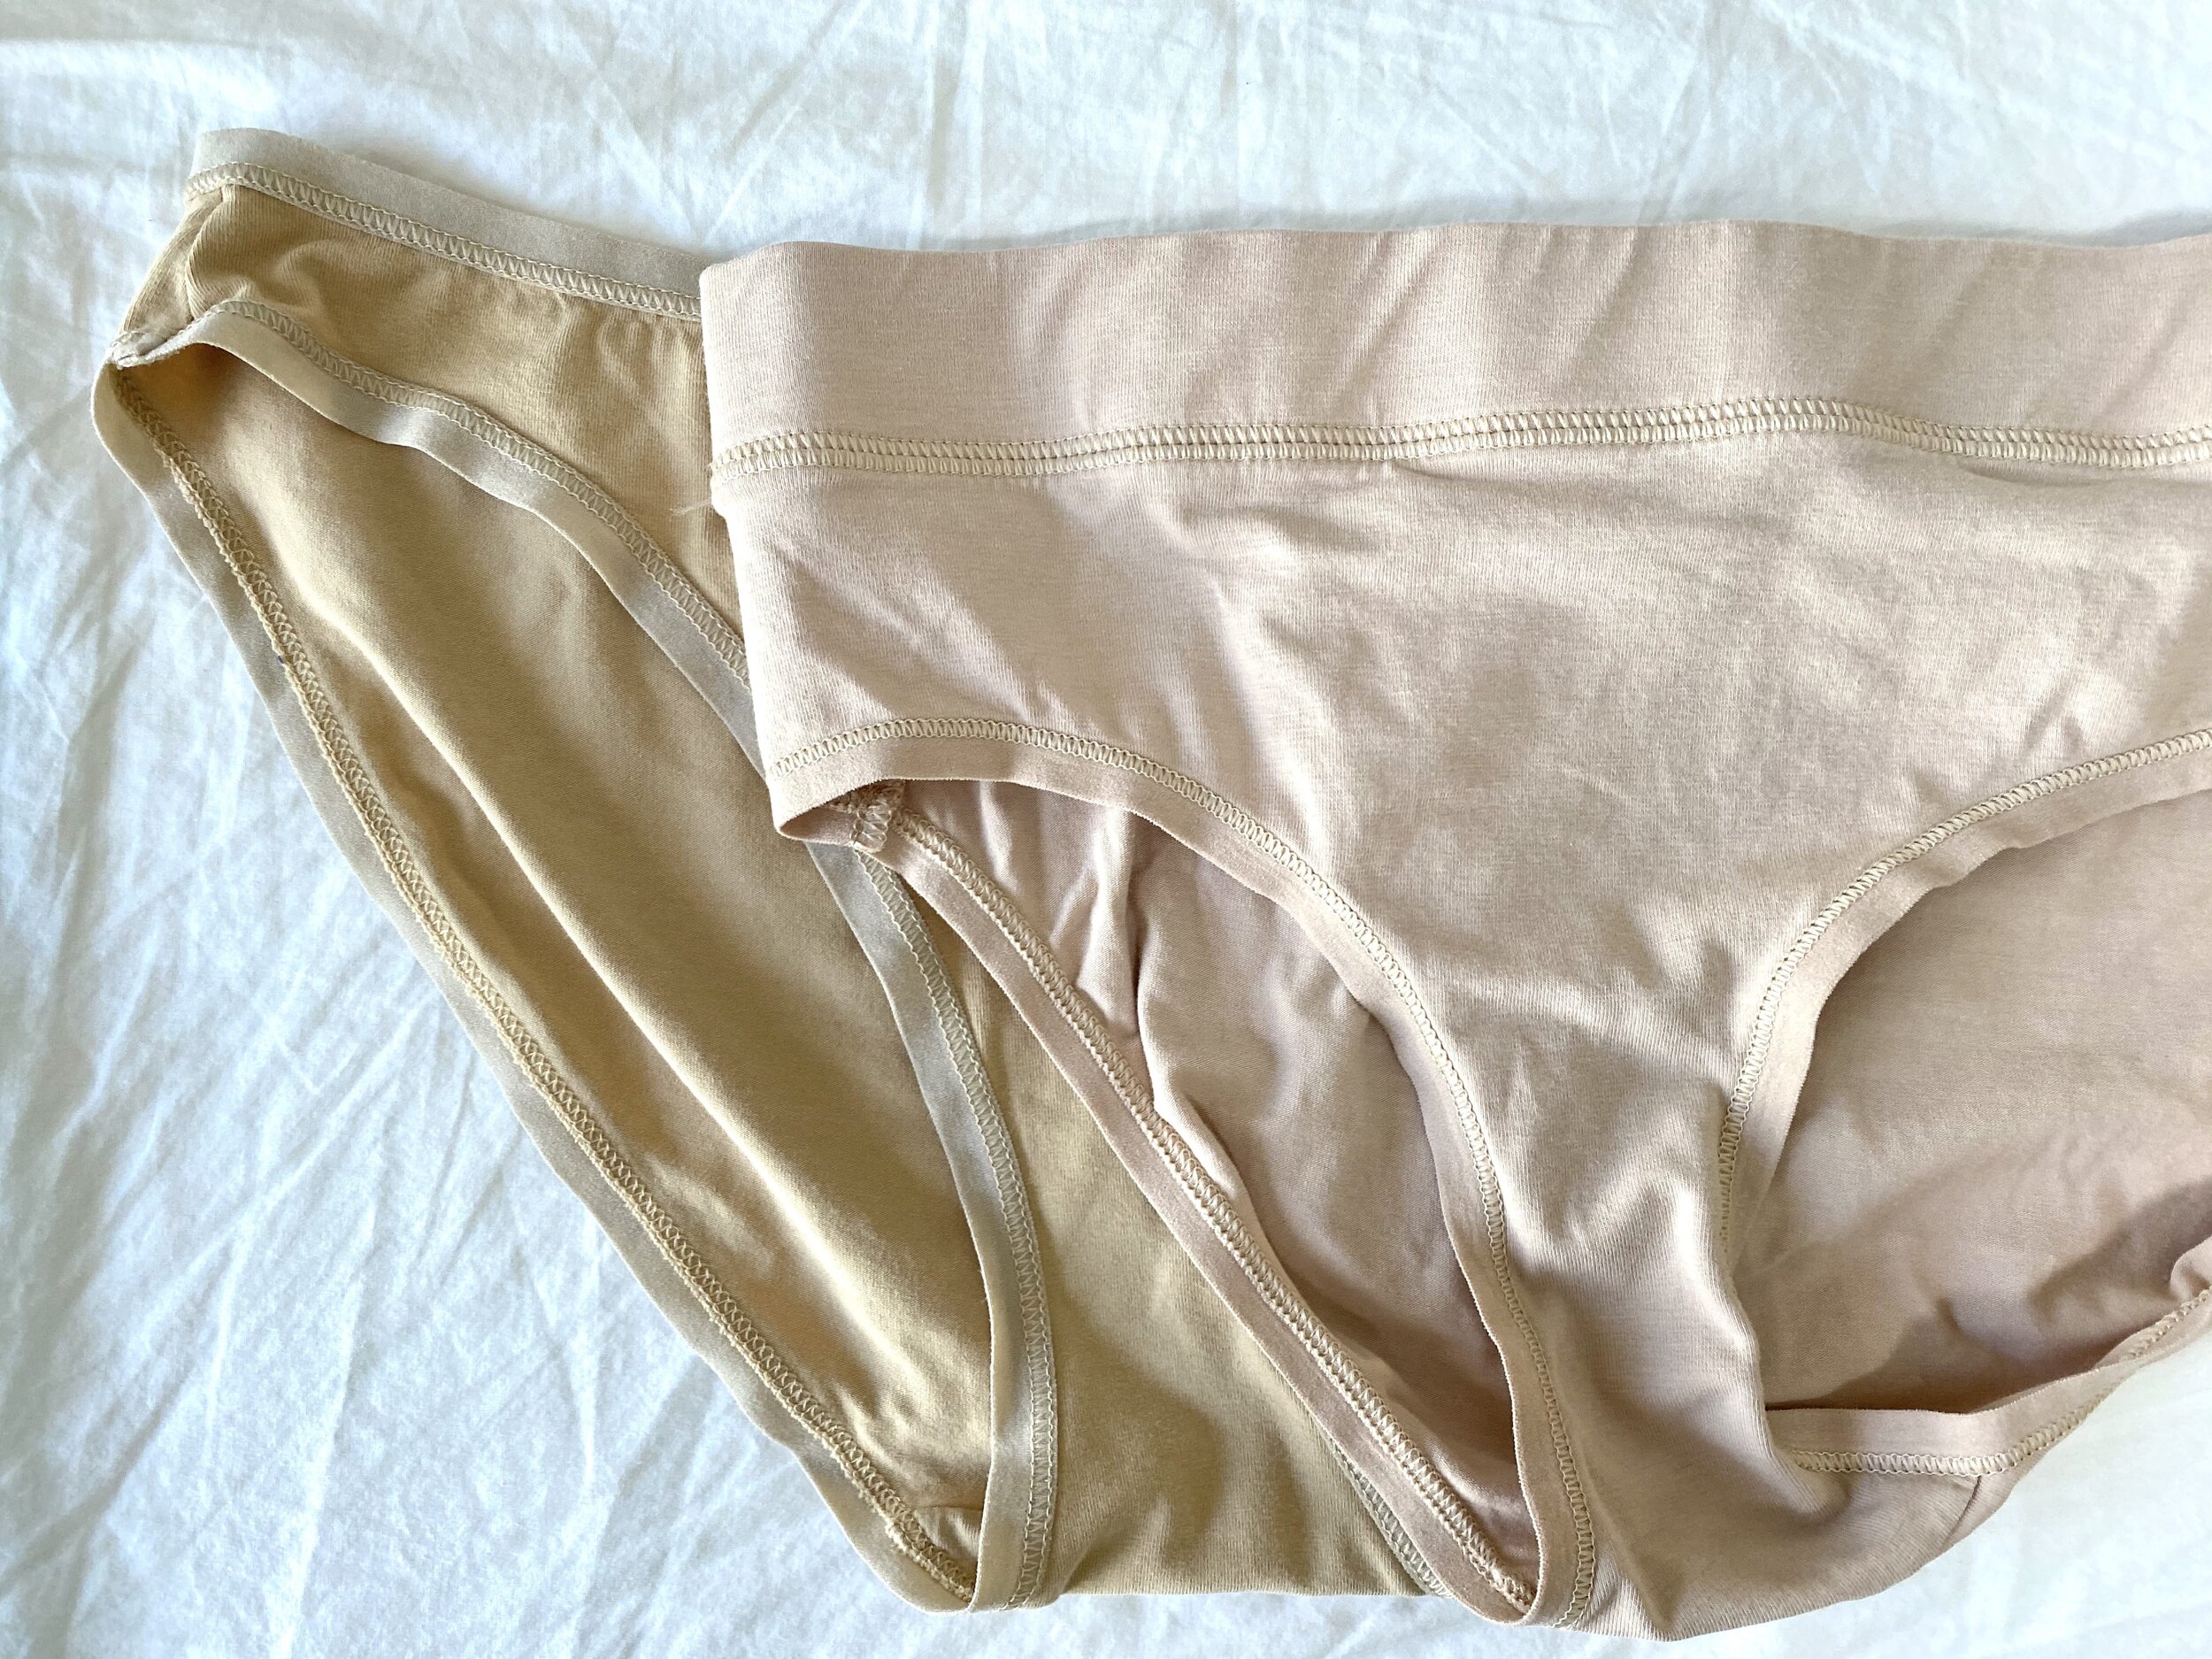 Organic Basics Review: Organic Cotton Underwear and Shirt — Fairly Curated